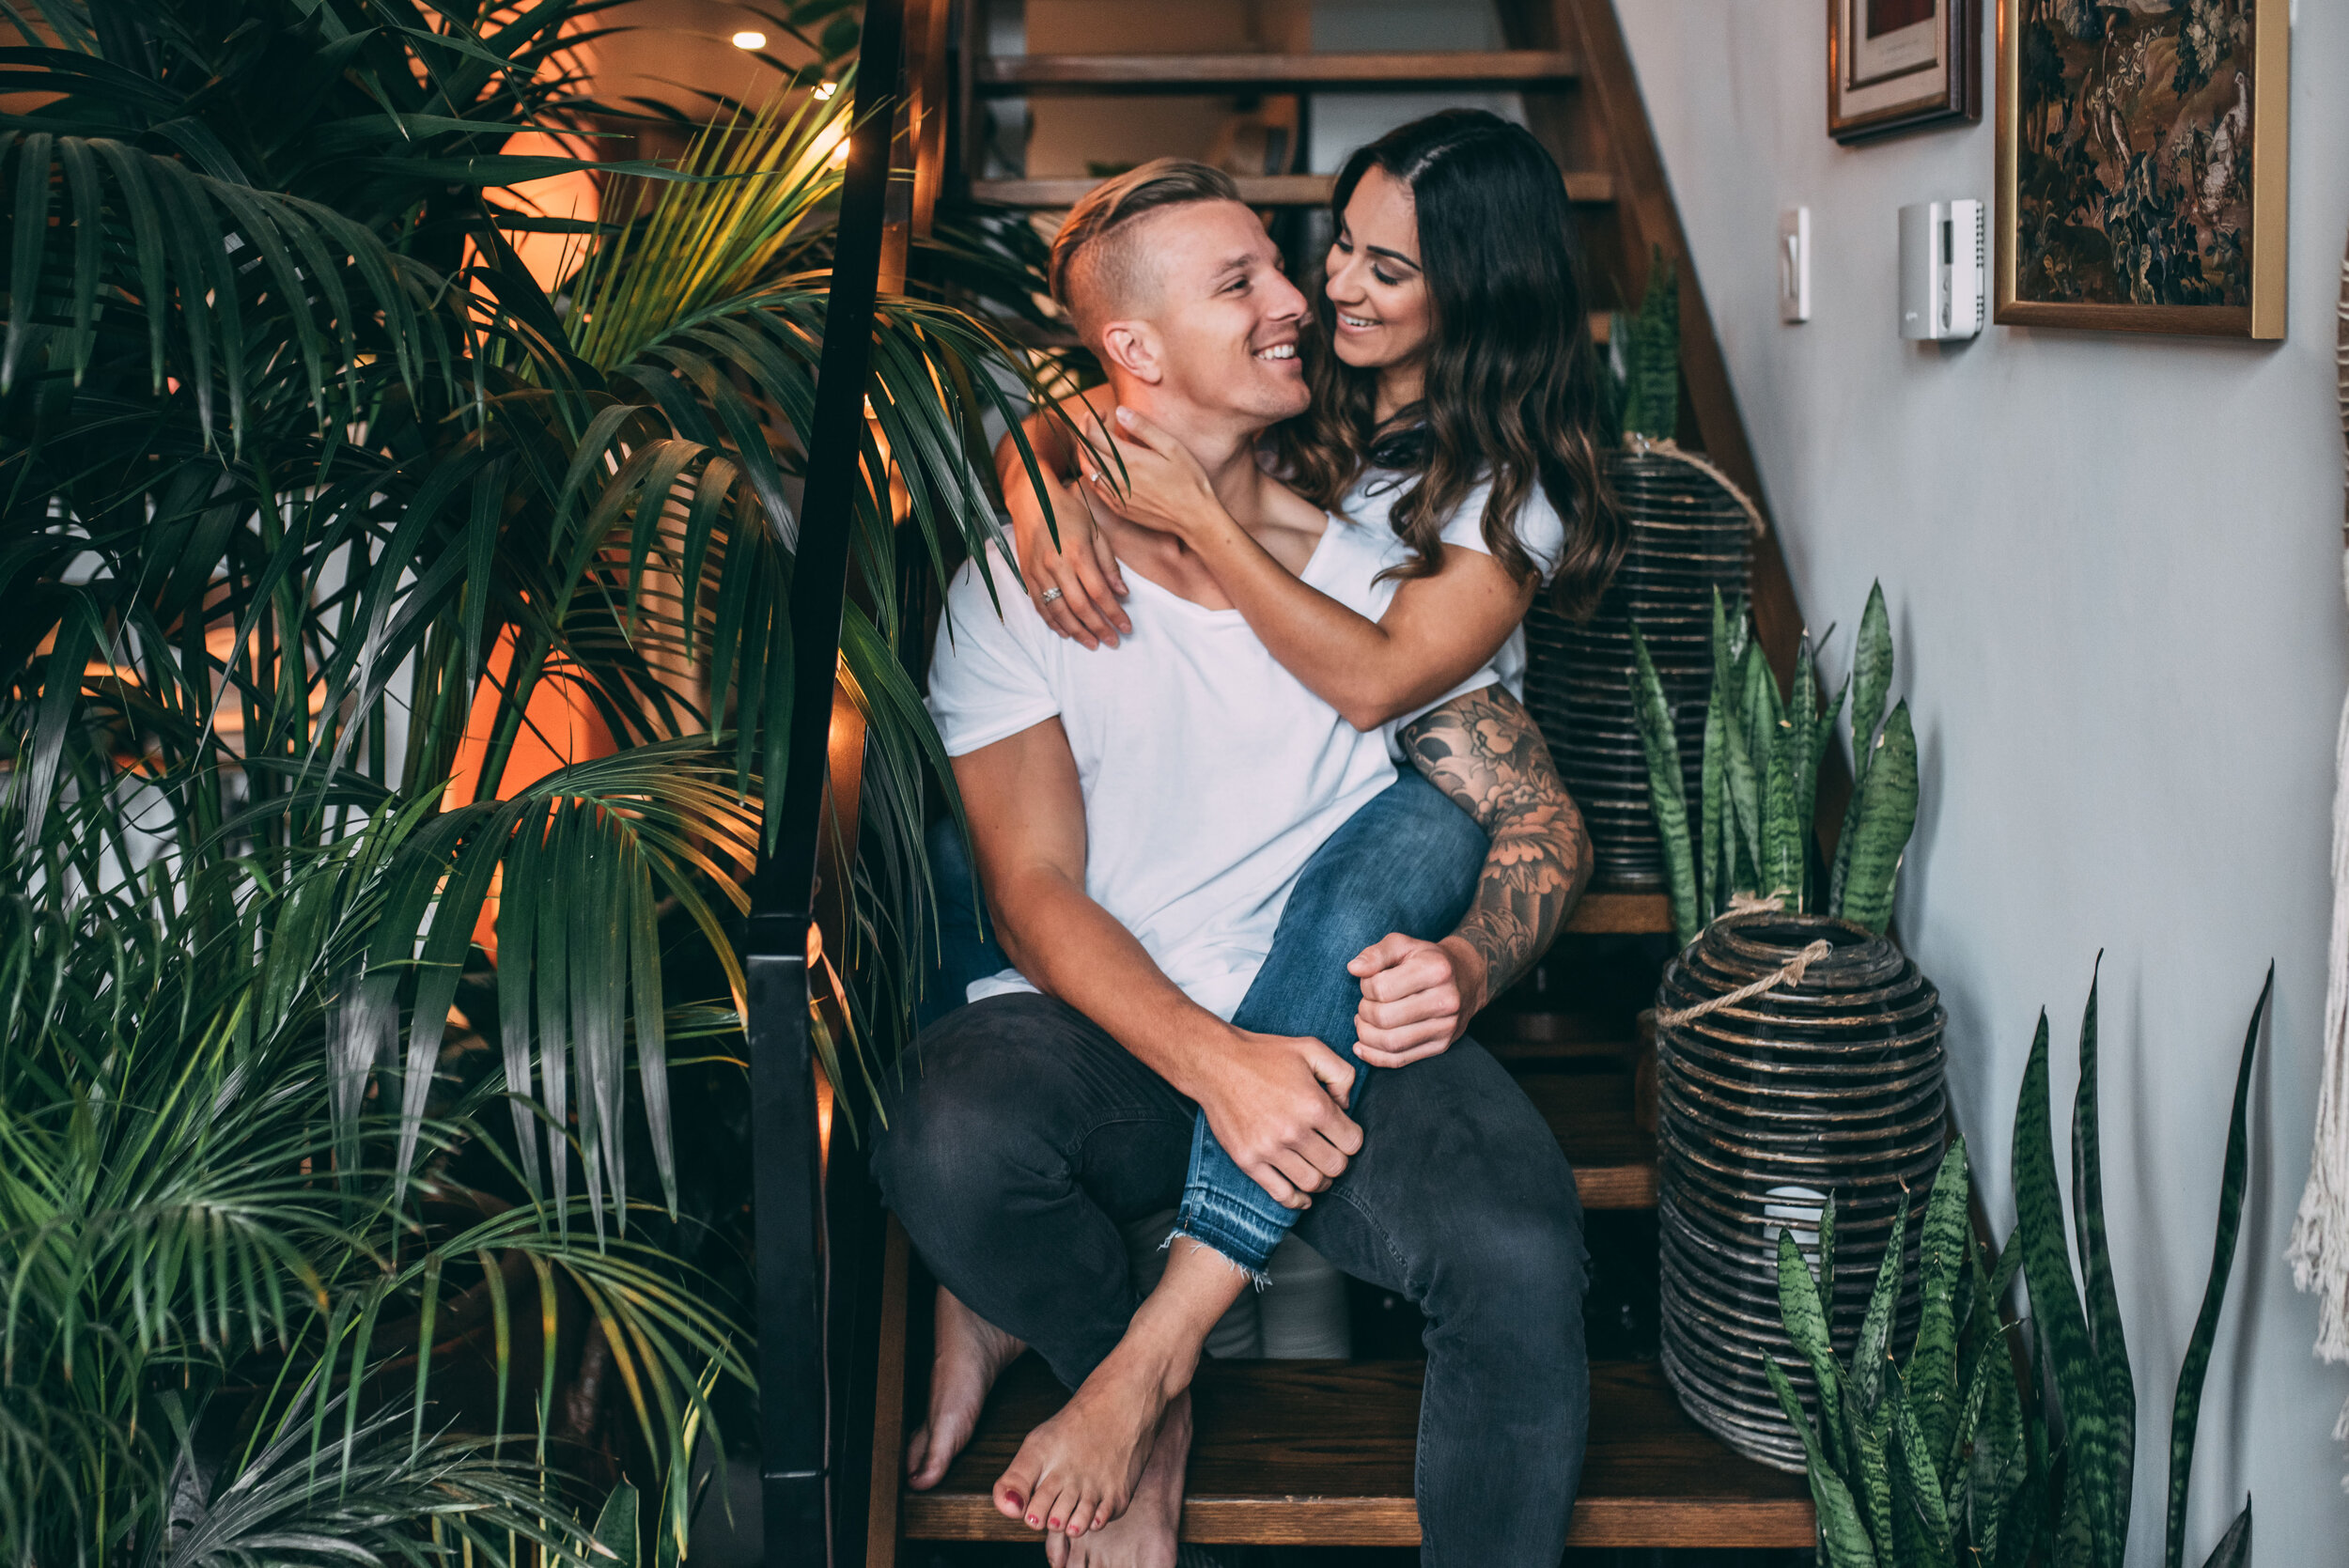 Vancouver Engagement Session - In Home Couples Session - Loft Garden Oasis - Laura Olson Photography - Sunshine Coast BC & Vancouver Wedding & Elopement Photographer7654.jpg